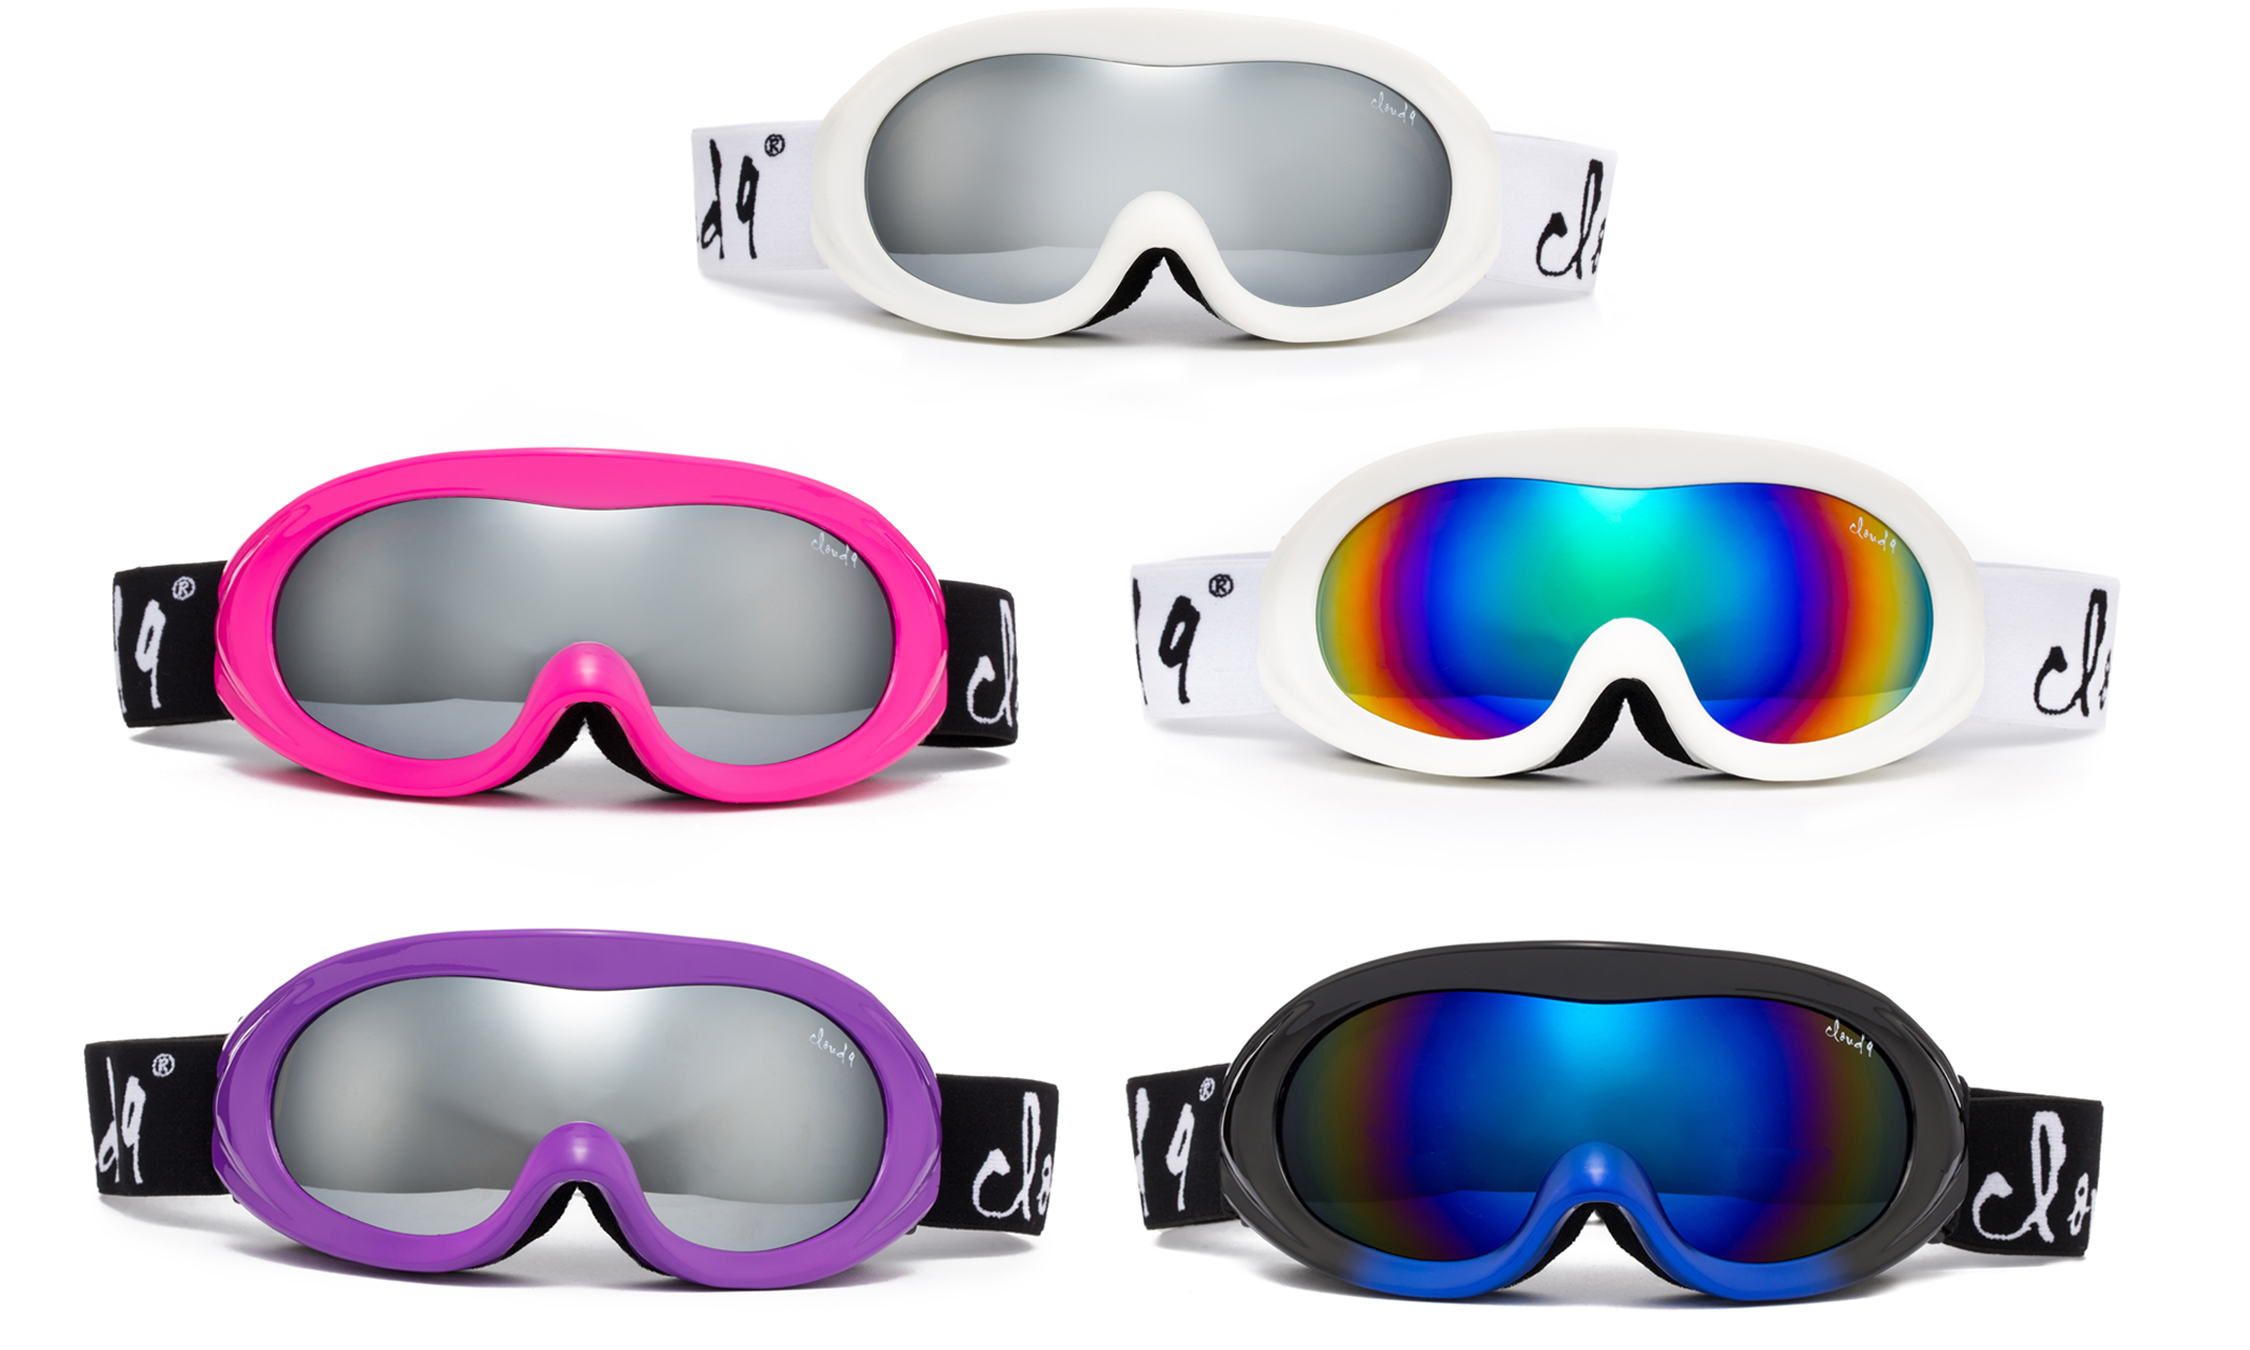 Cloud 9 - Professional Snow Goggles for Teens Girls and Boys Anti-Fog Windproof UV400 Dual Lens Triple Layered Foam Snowboarding Ski Goggles Junior - image 1 of 4